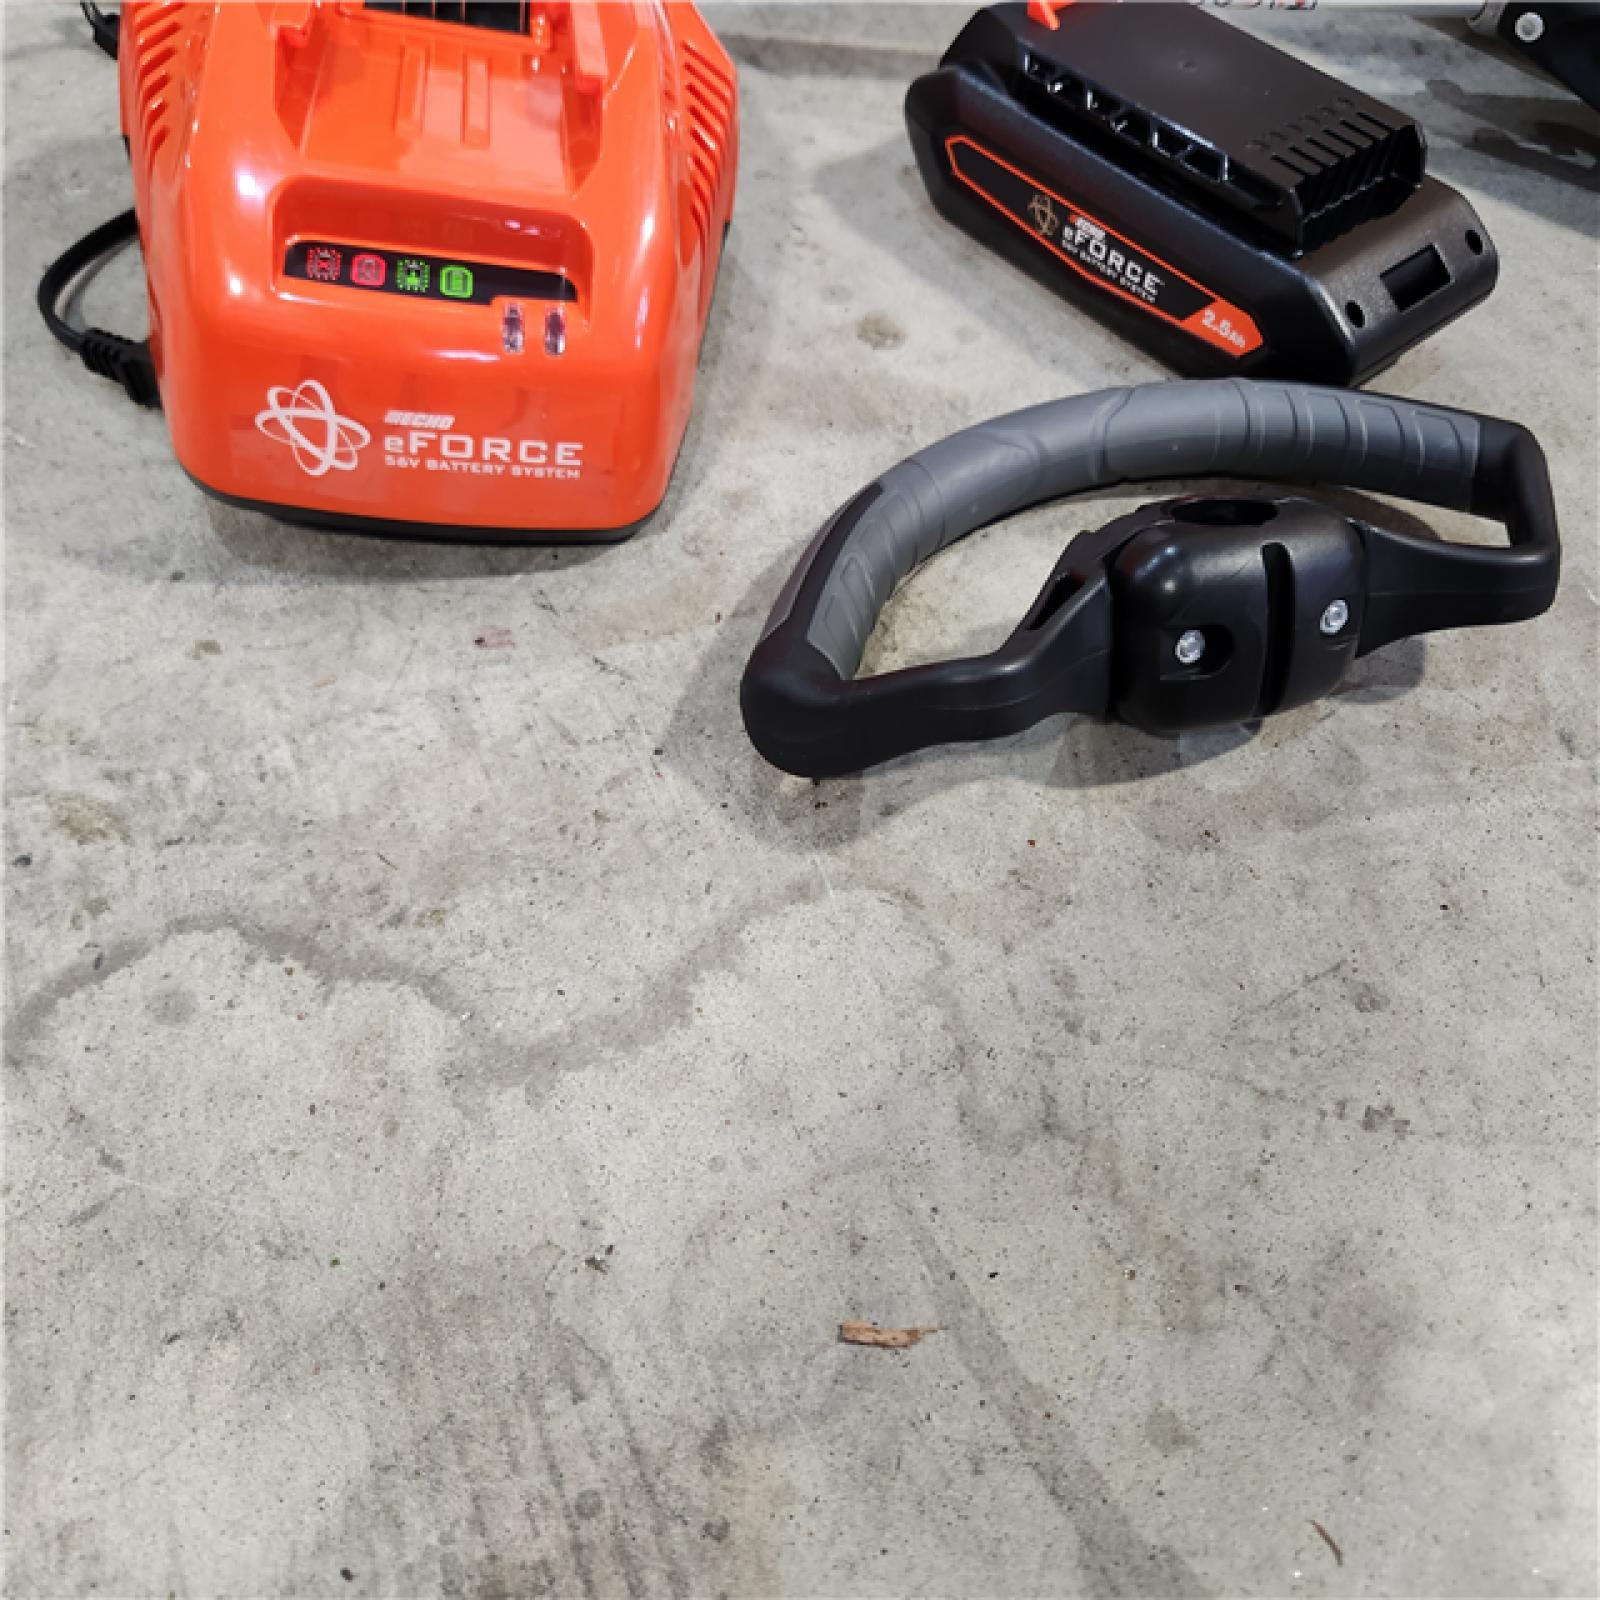 Houston location- AS-IS Echo EFORCE 56V 16 in. Brushless Cordless Battery String Trimmer with 2.5Ah Battery and Charger - DSRM-2100C1 (Appears in new condition)